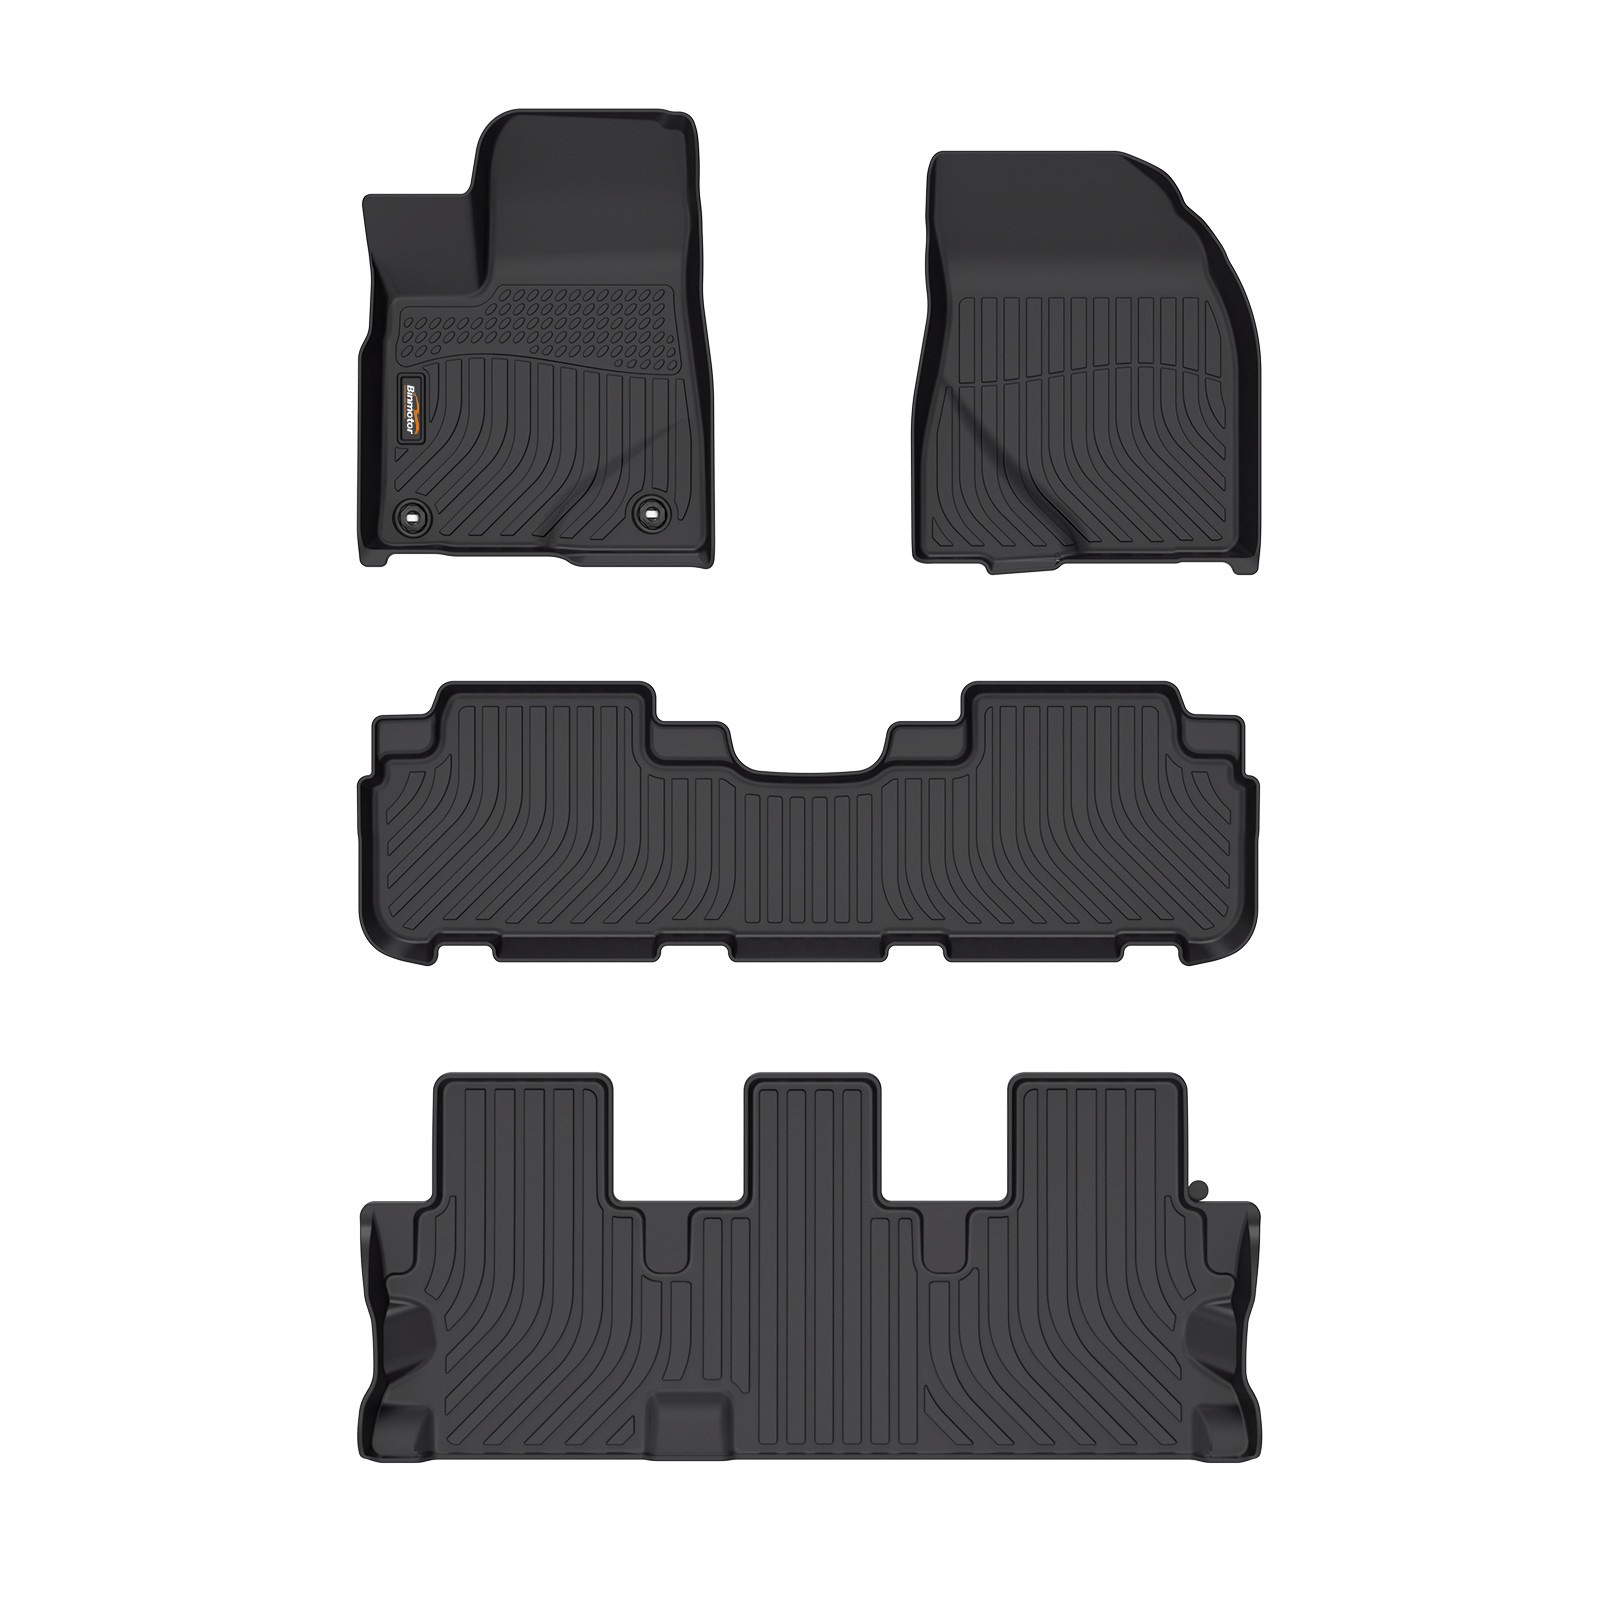 Binmotor-Floor Mats for TPE Floor Mats for Toyota Highlander 8 Seats , All Weather Protection, Heavy Duty Automotive Car Floor Liners, Full Set Highlander Accessories Car Mats-Black（compatible year 2014-2019）